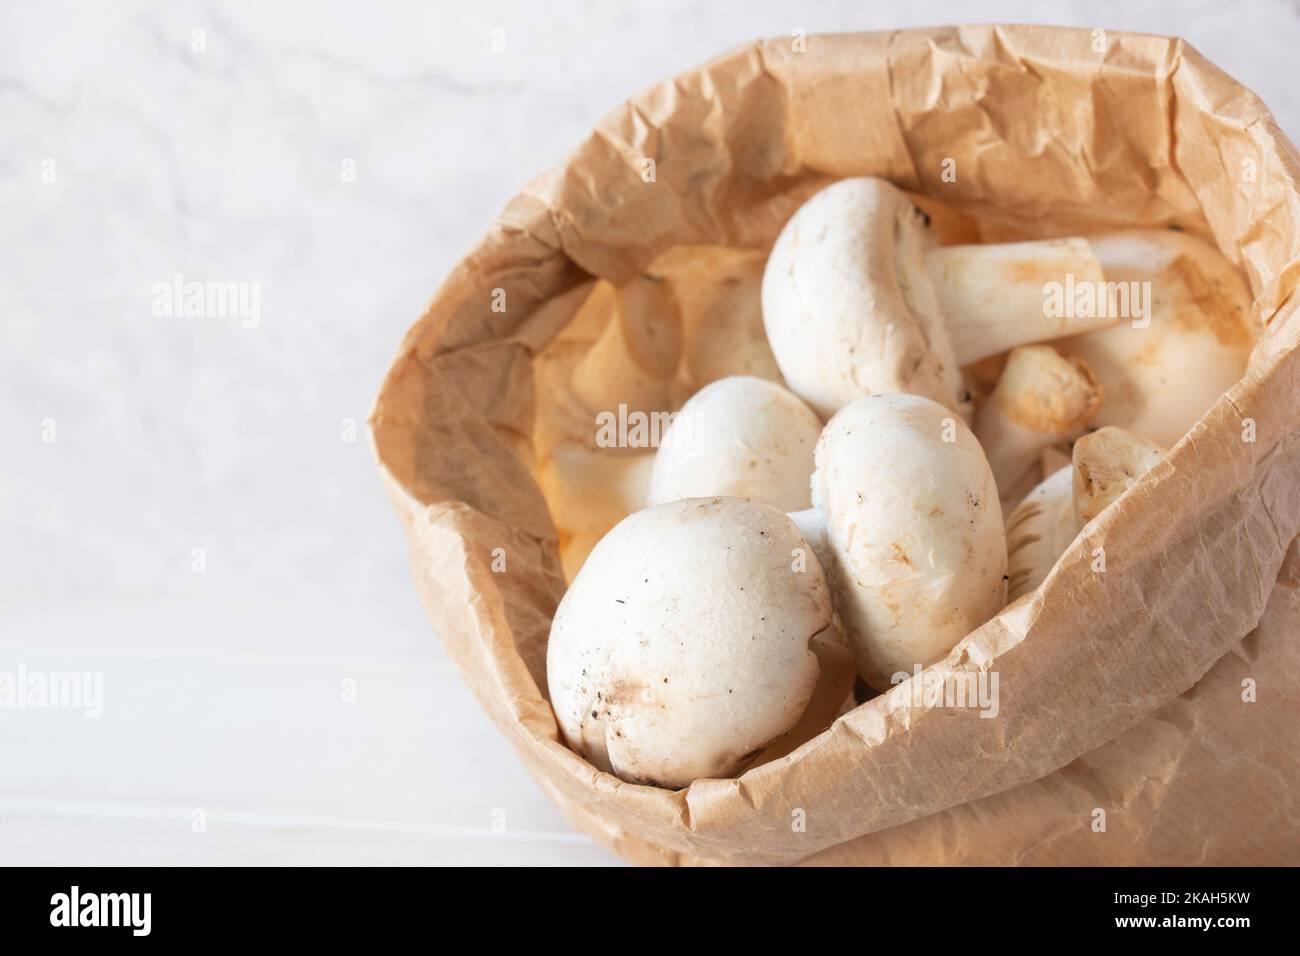 Closed cup mushrooms in a brown paper bag. Eco friendly recycling compostable packaging. Stock Photo